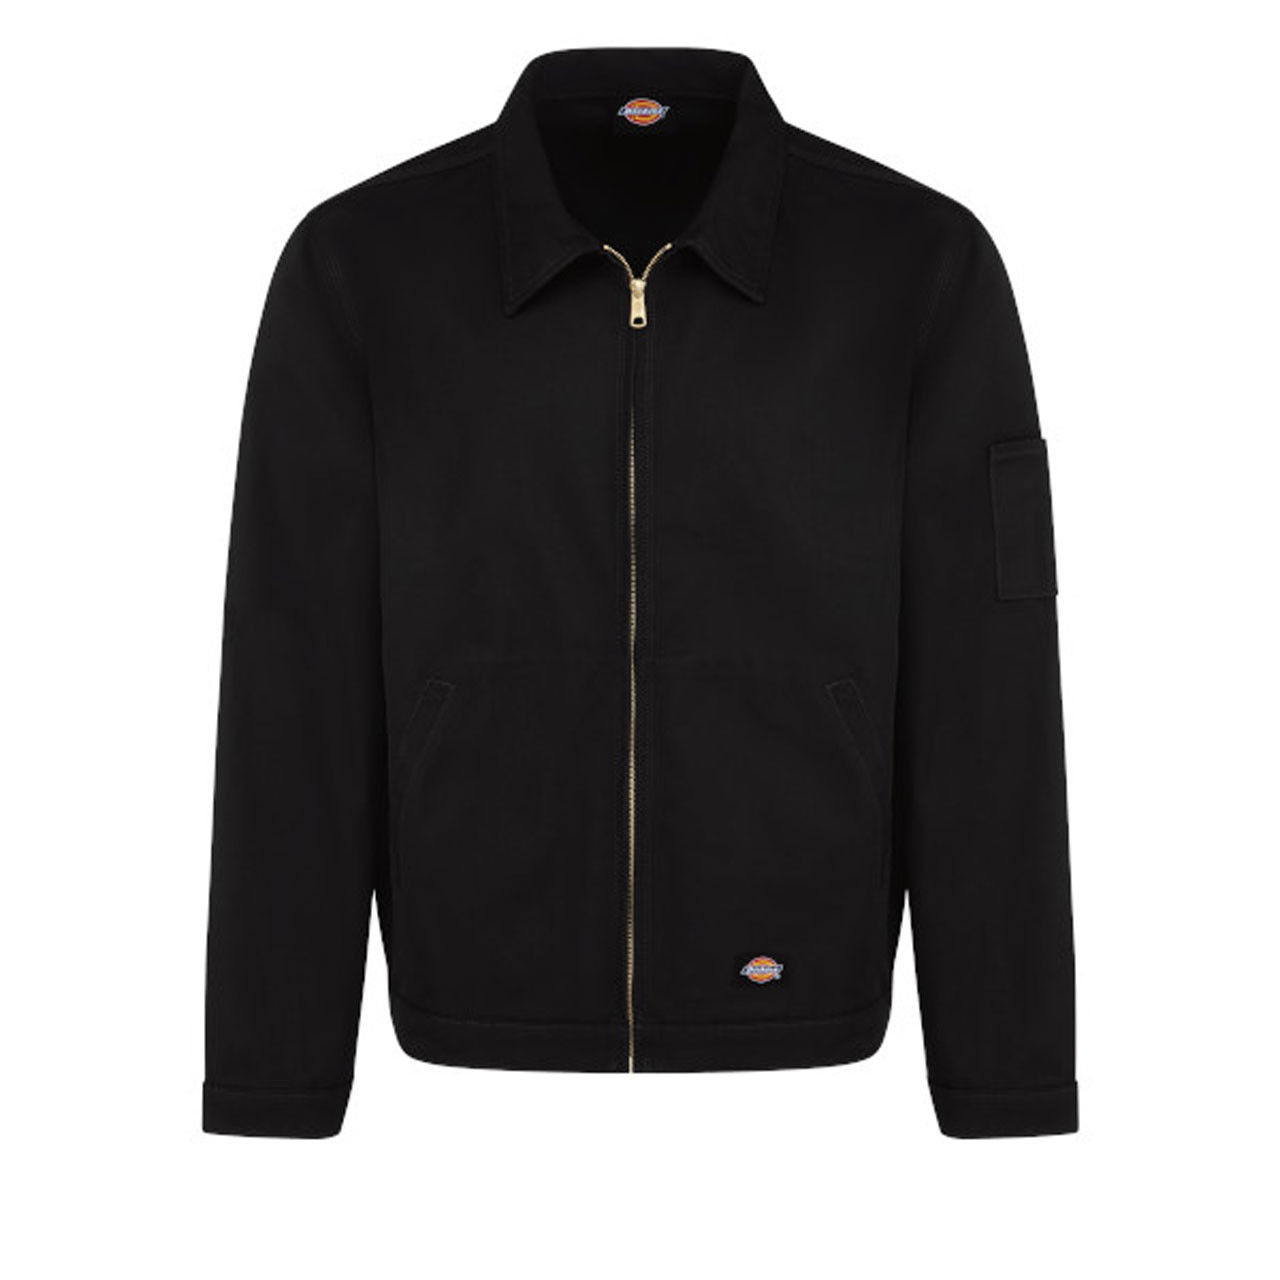 What kind of look does the Dickies Unlined Industrial Eisenhower Jacket have?